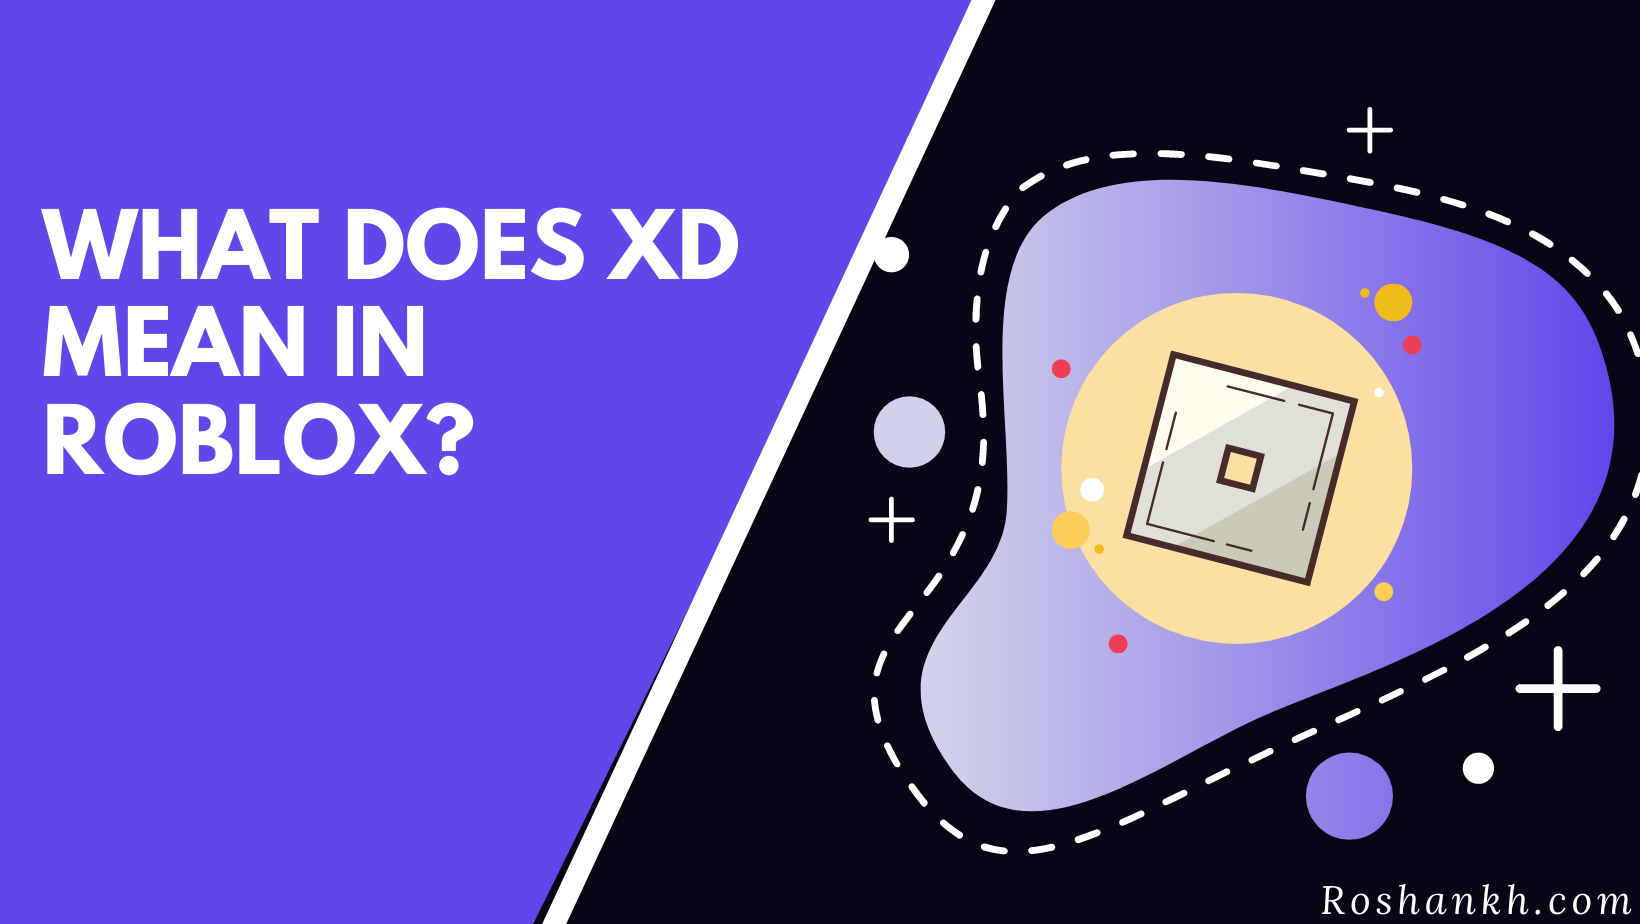 What does xd mean in Roblox?